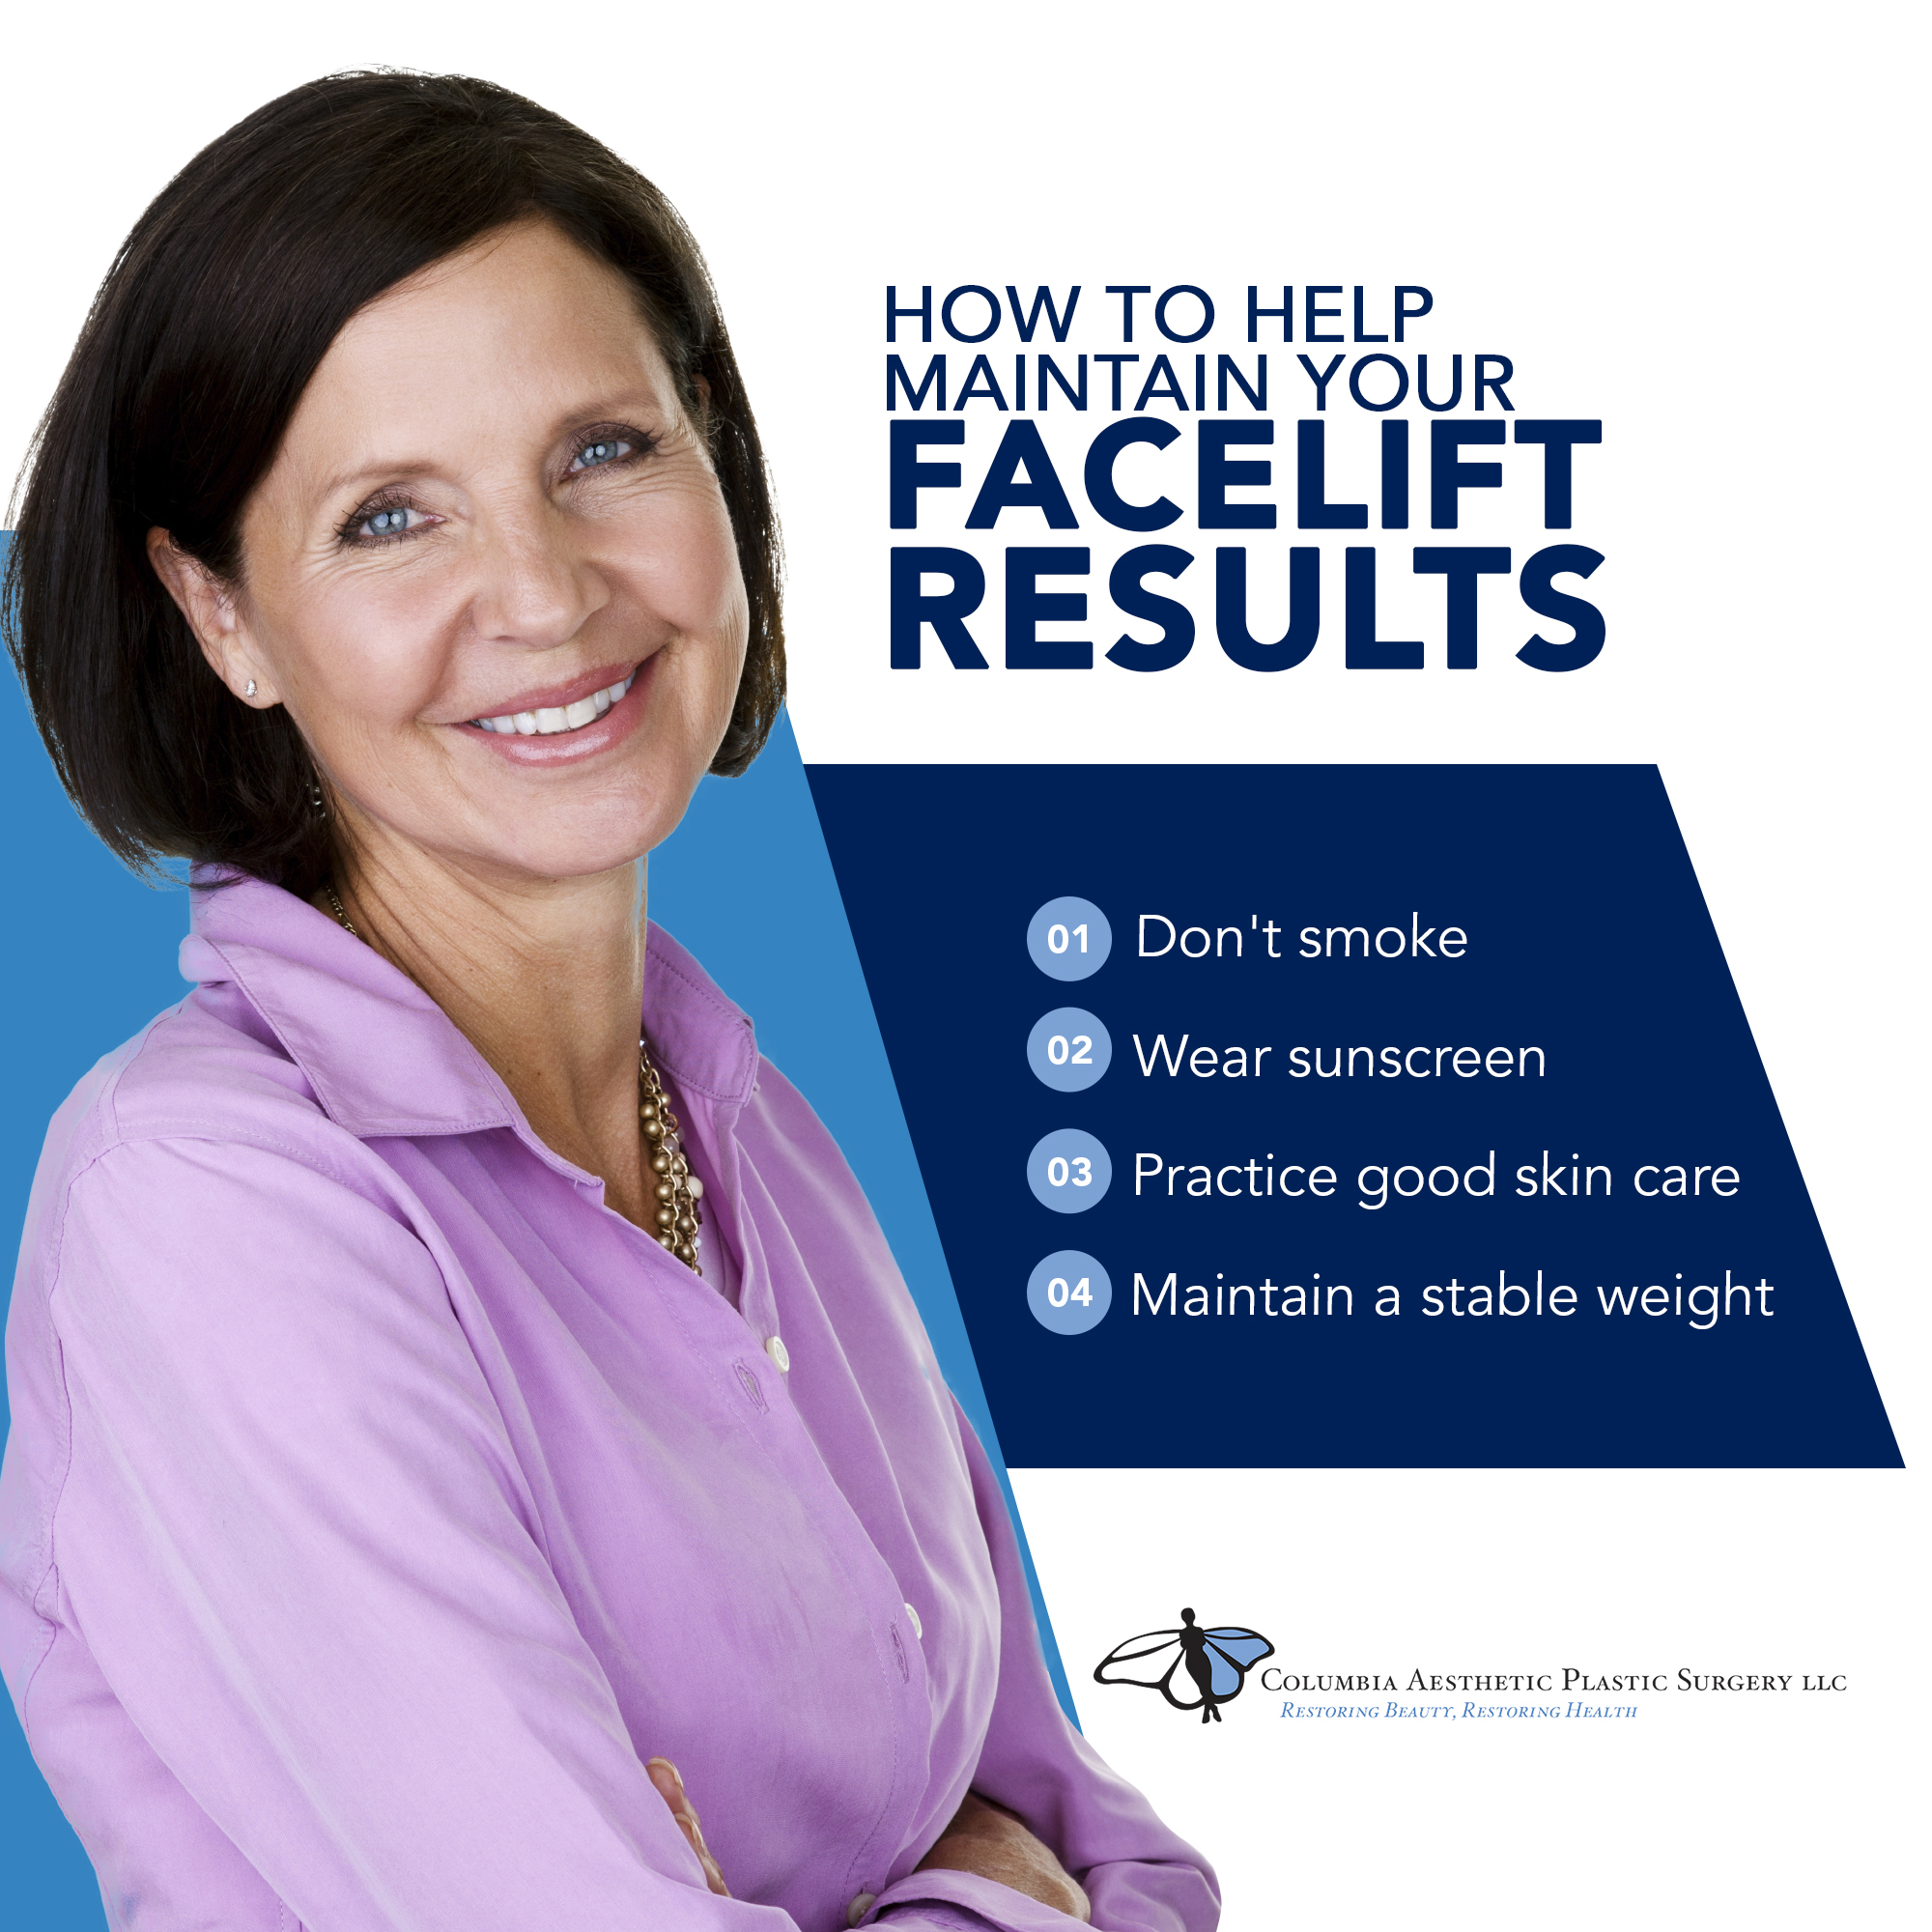 How To Help Maintain Your Facelift Results [Infographic] img 1